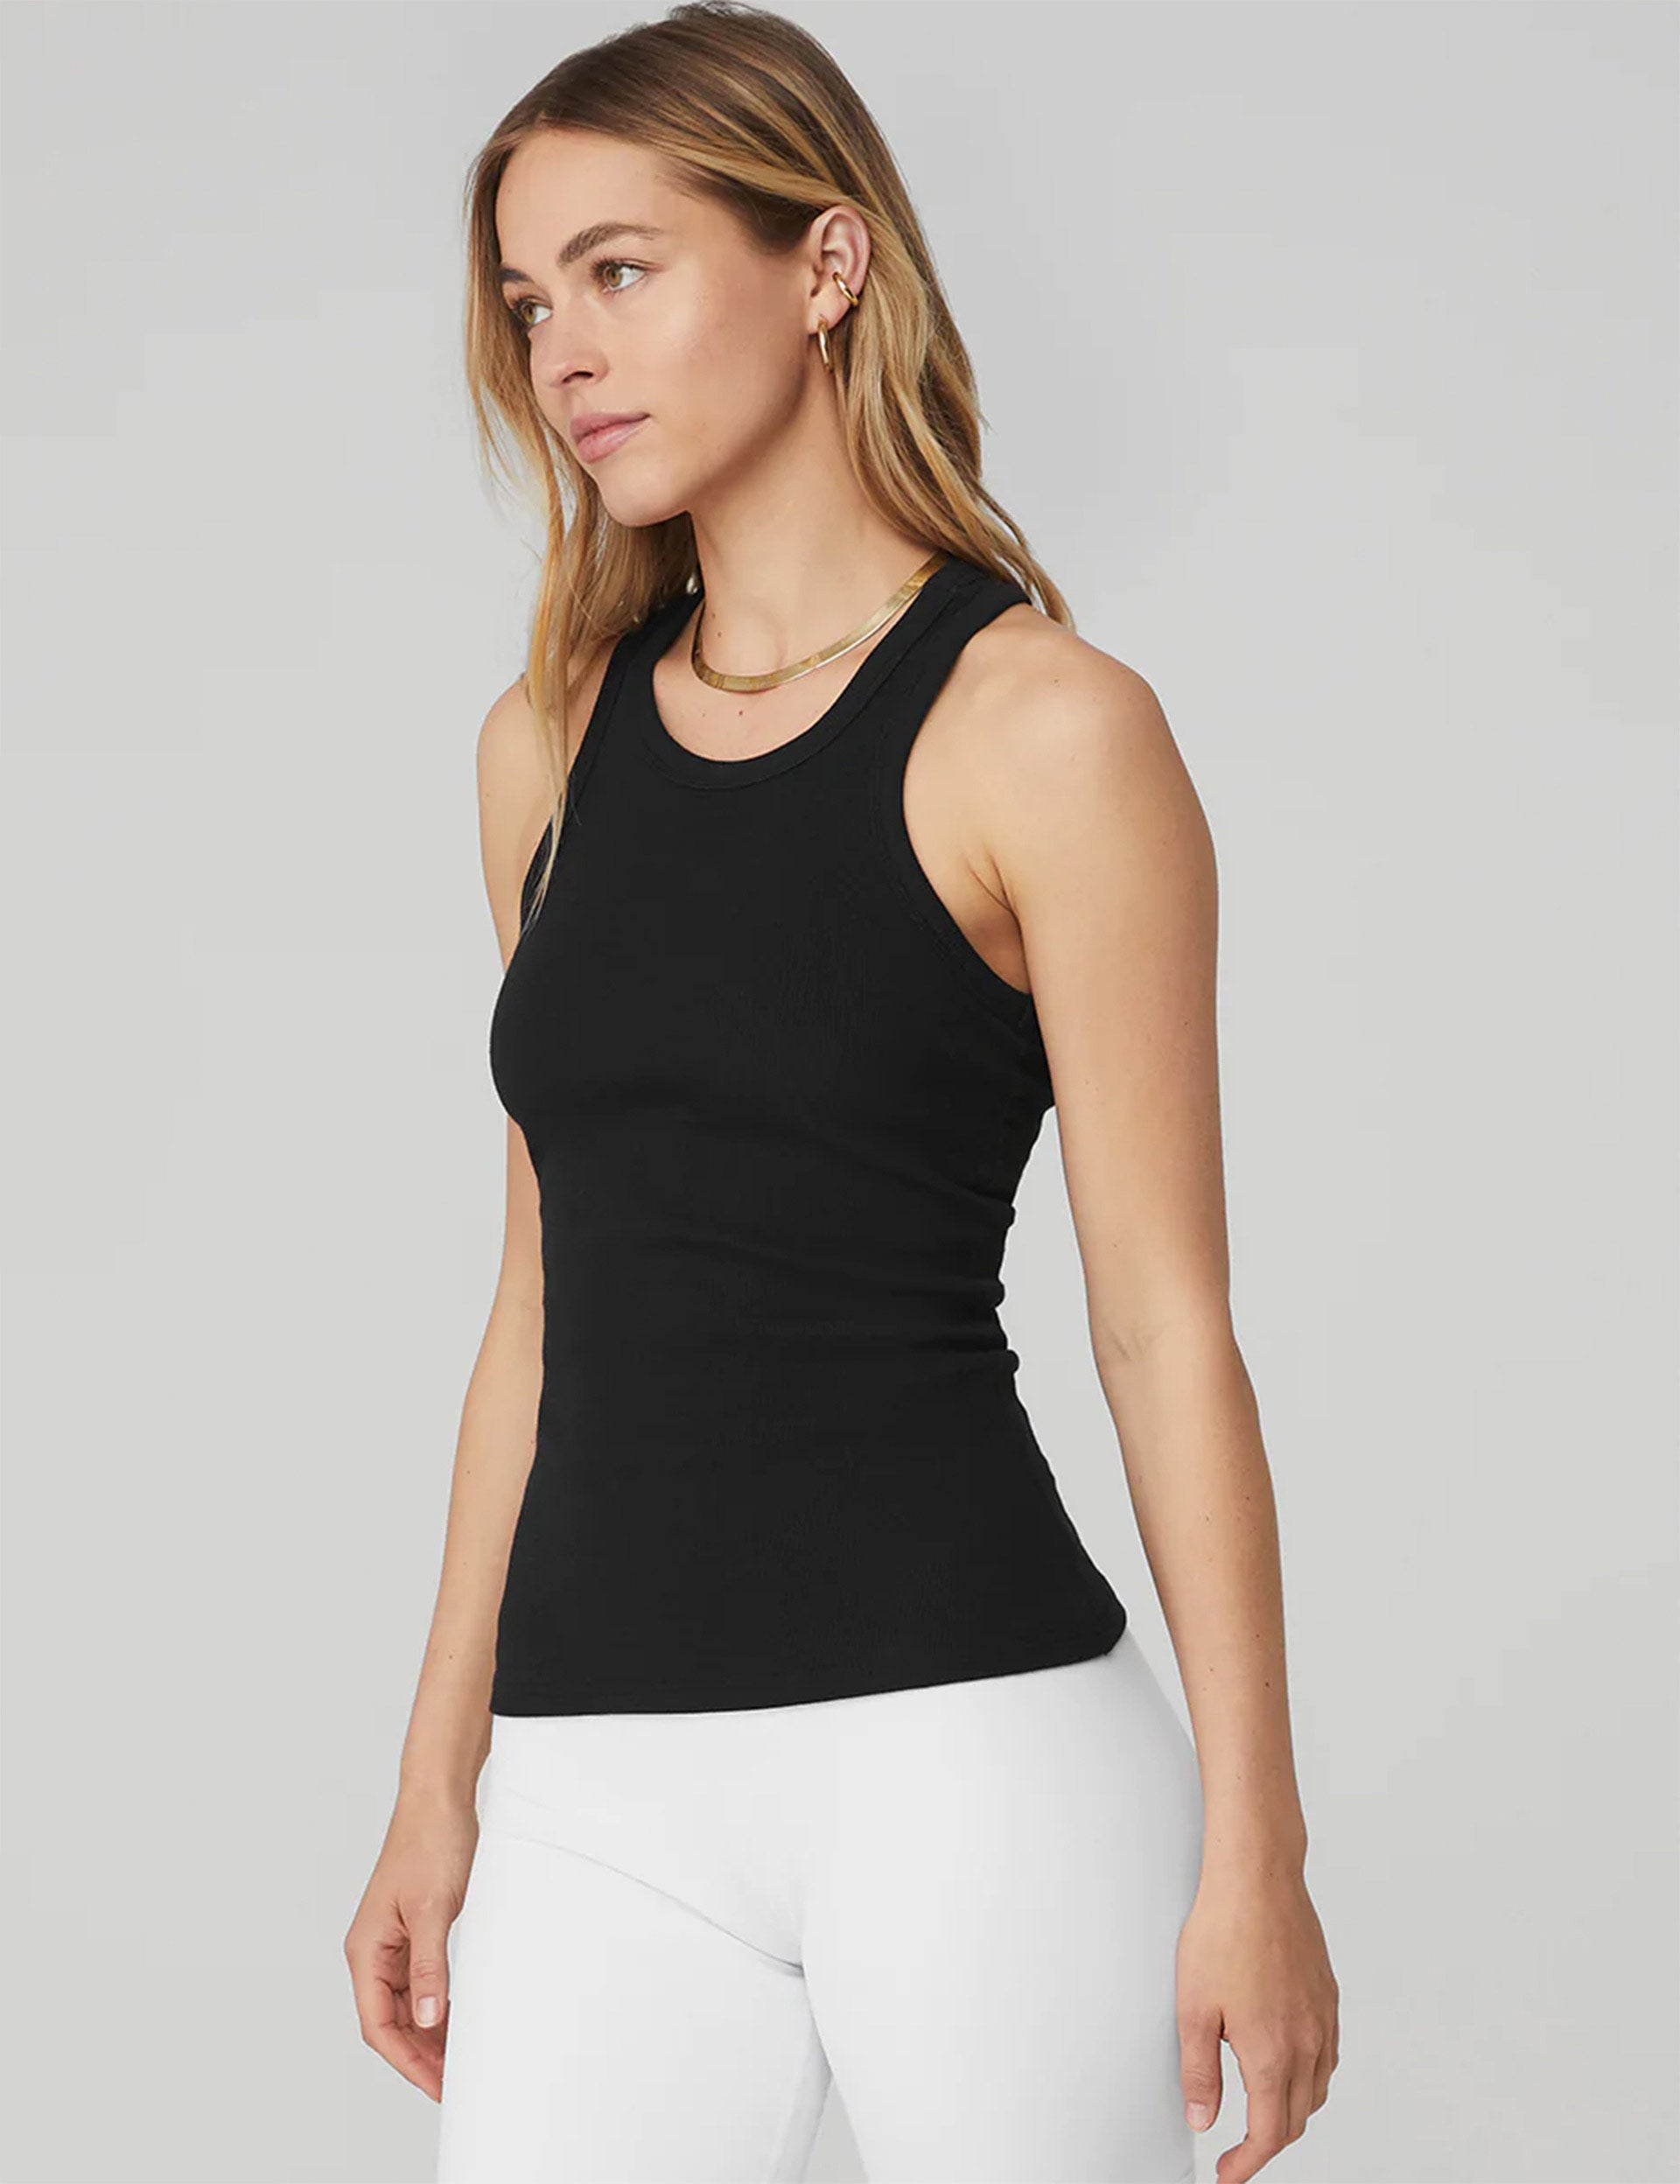 ALO YOGA, 'Aspire' Ribbed Cropped Tank Top, Women